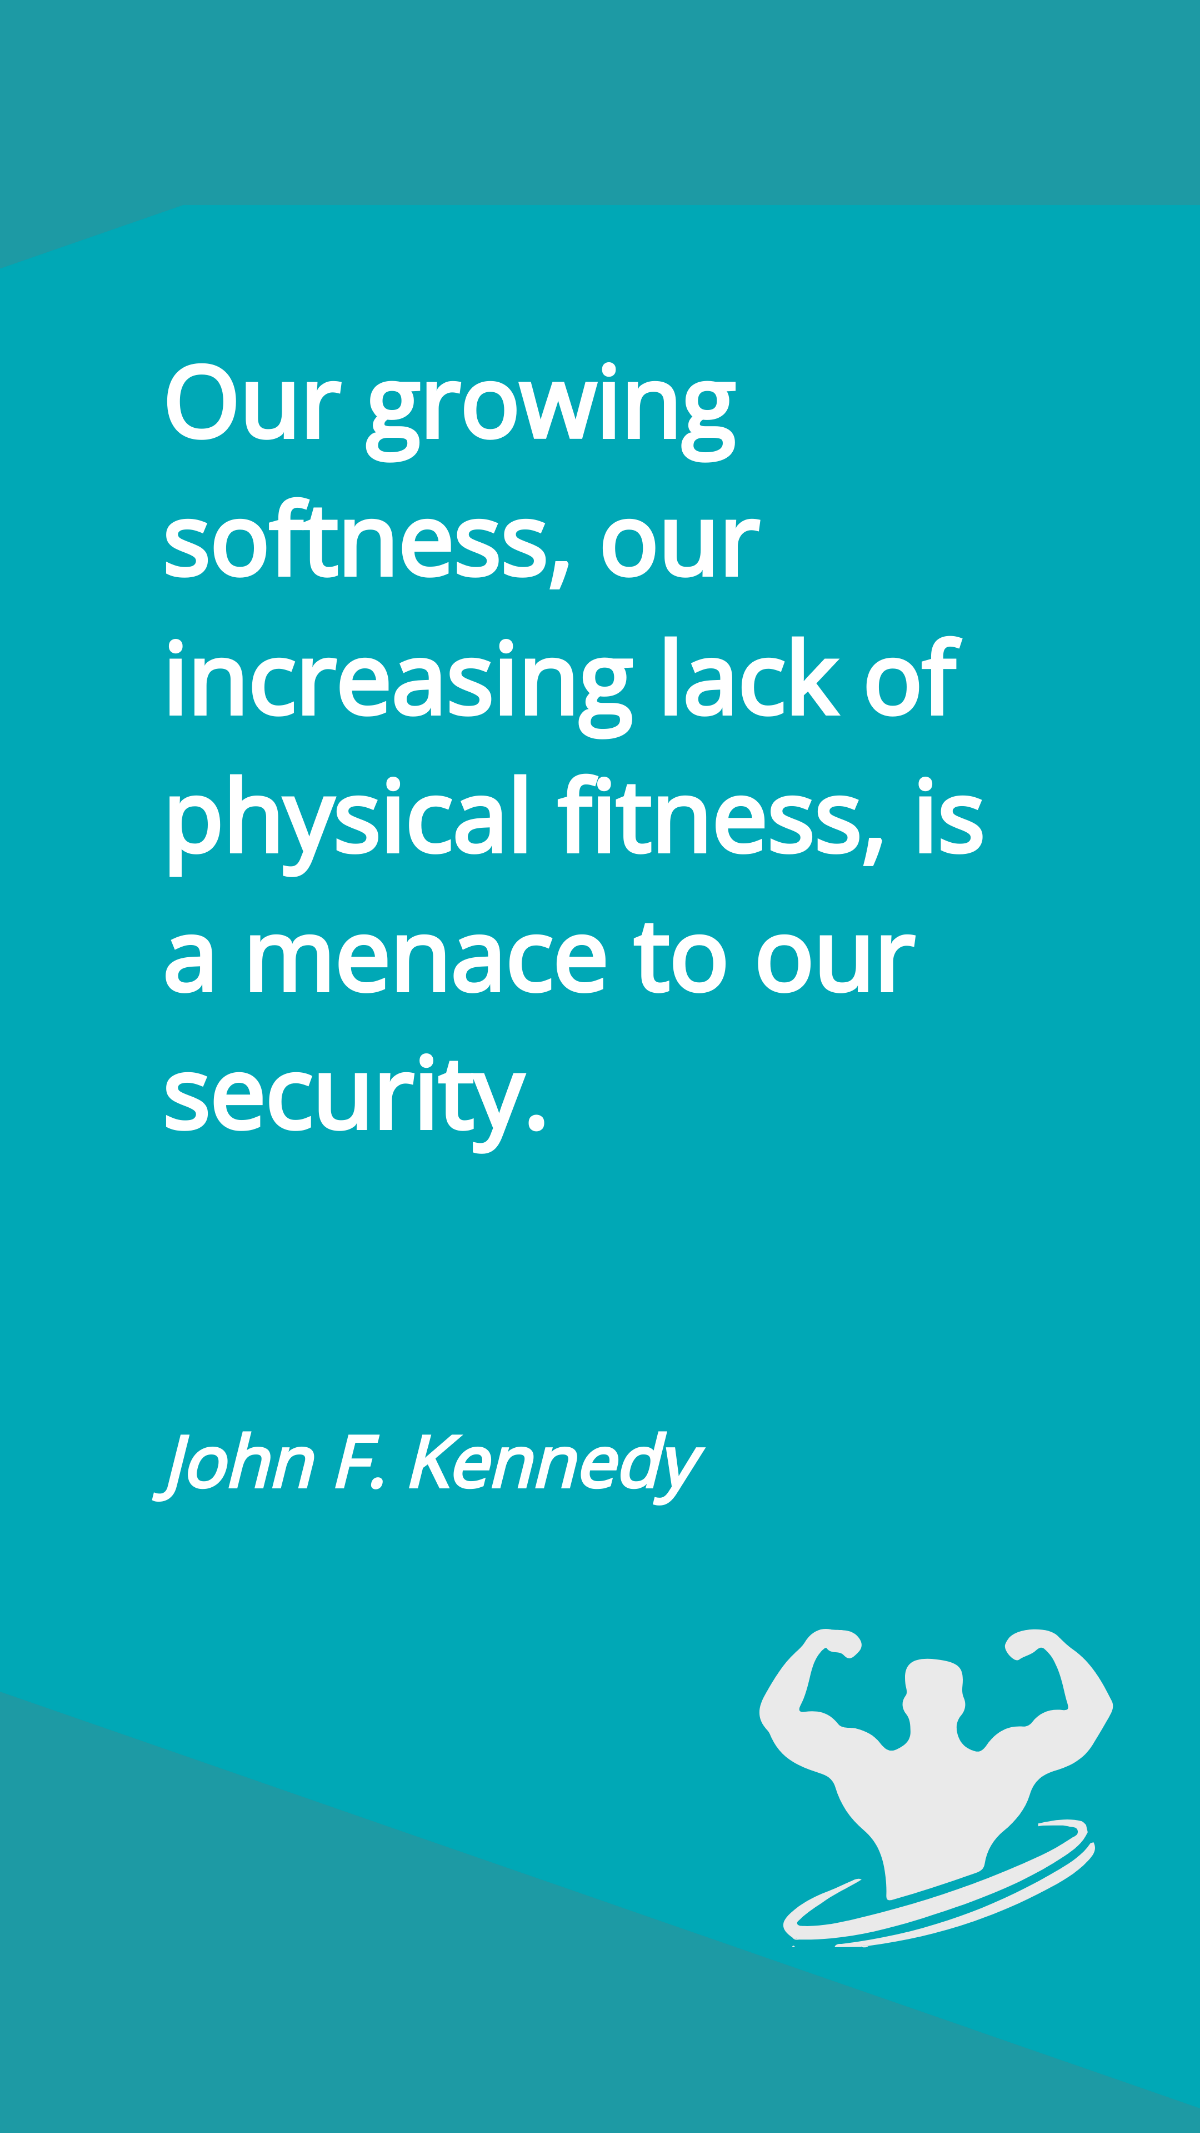 Free John F. Kennedy - Our growing softness, our increasing lack of physical fitness, is a menace to our security. Template